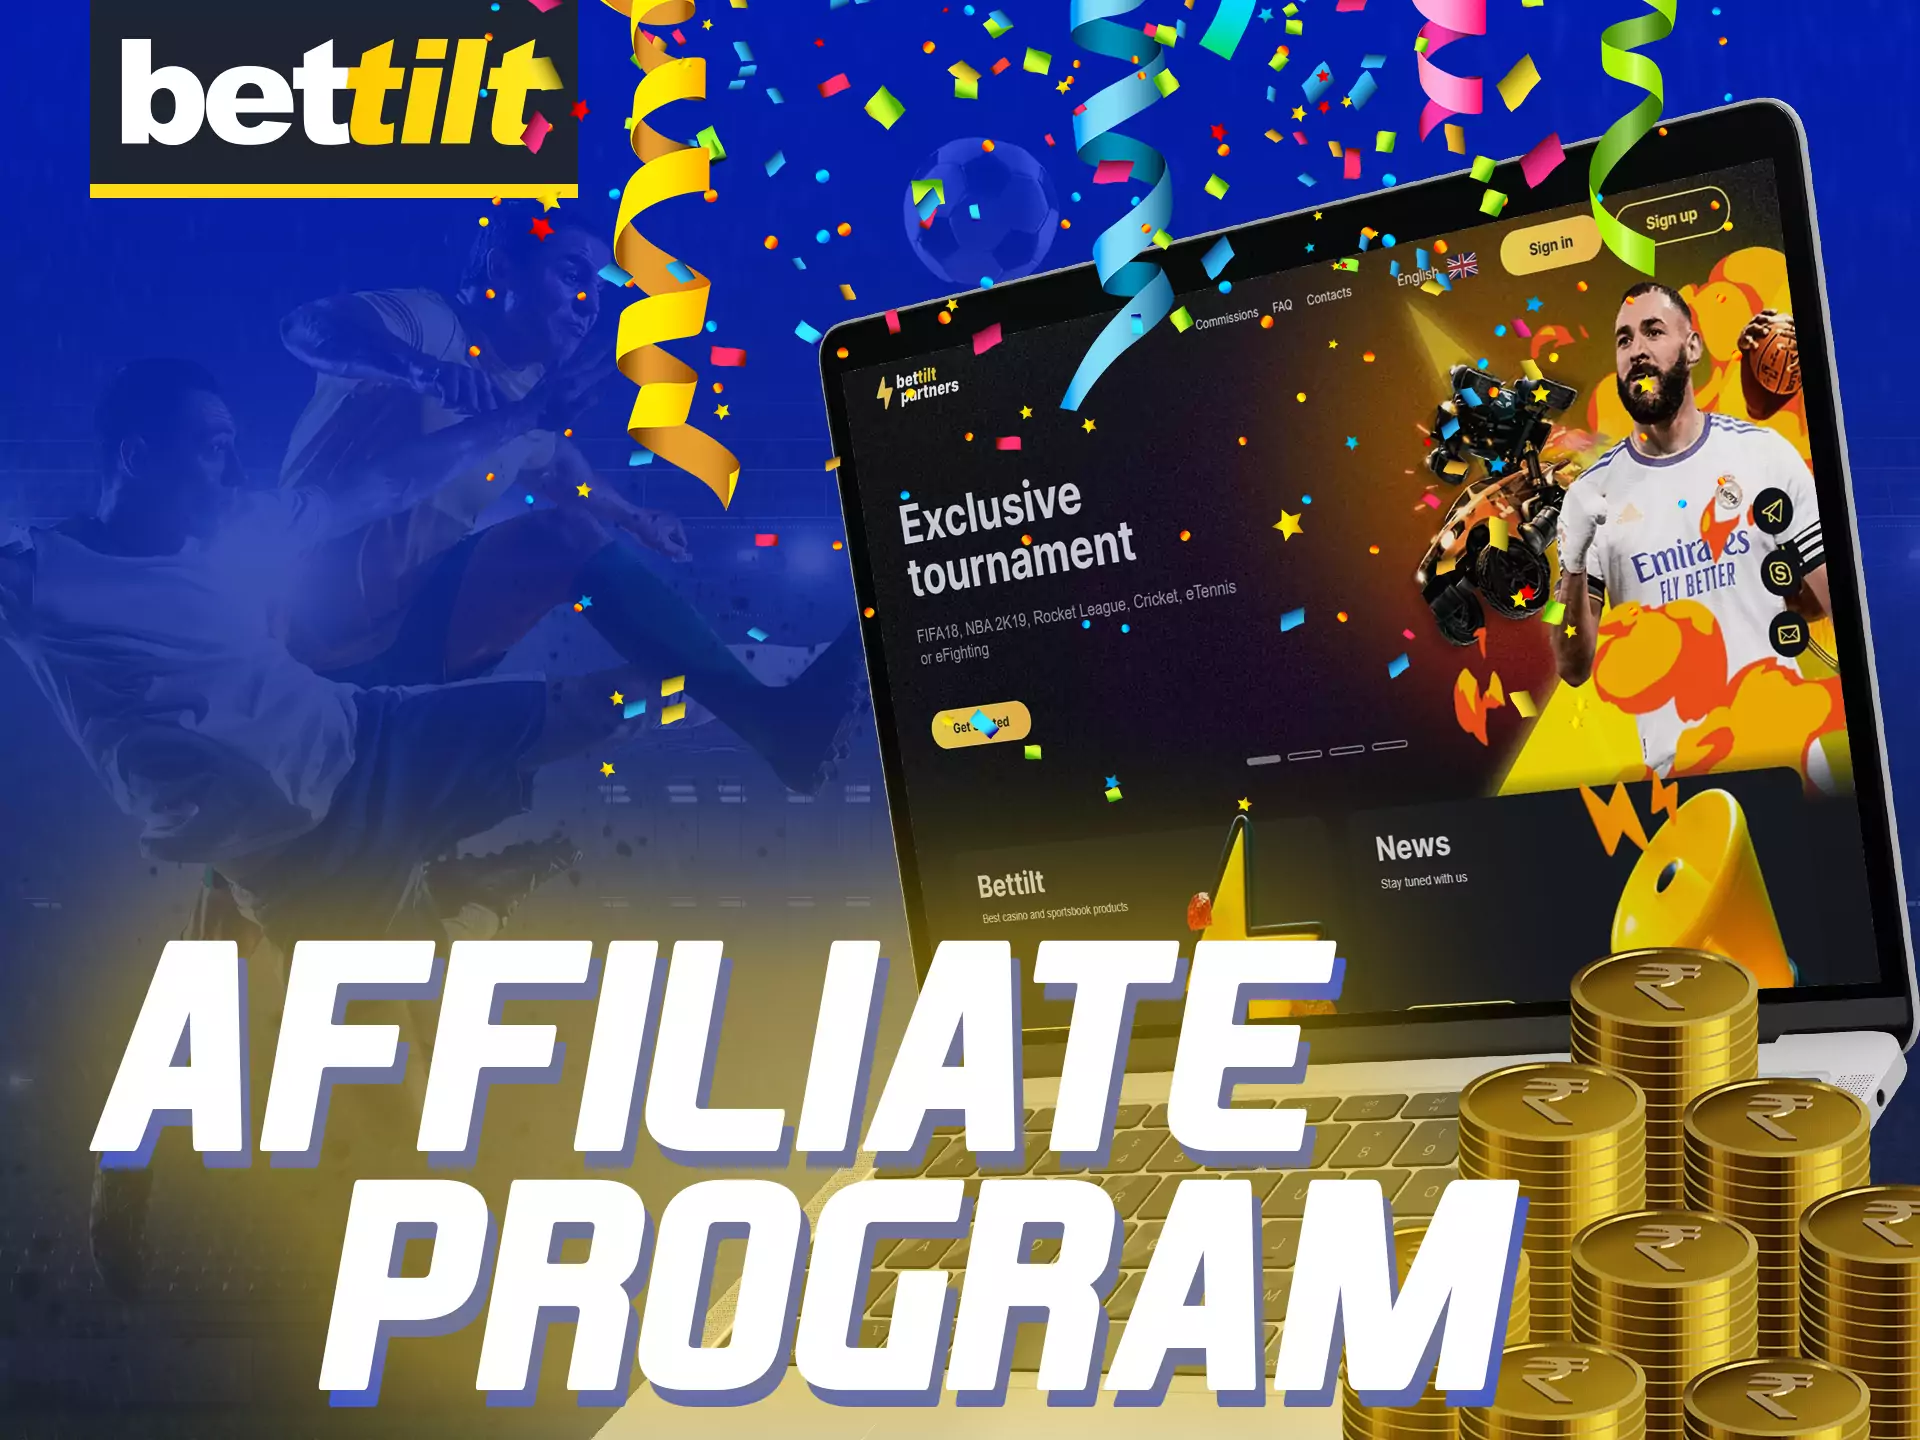 Join Bettilt's affiliate program and get even more benefits.